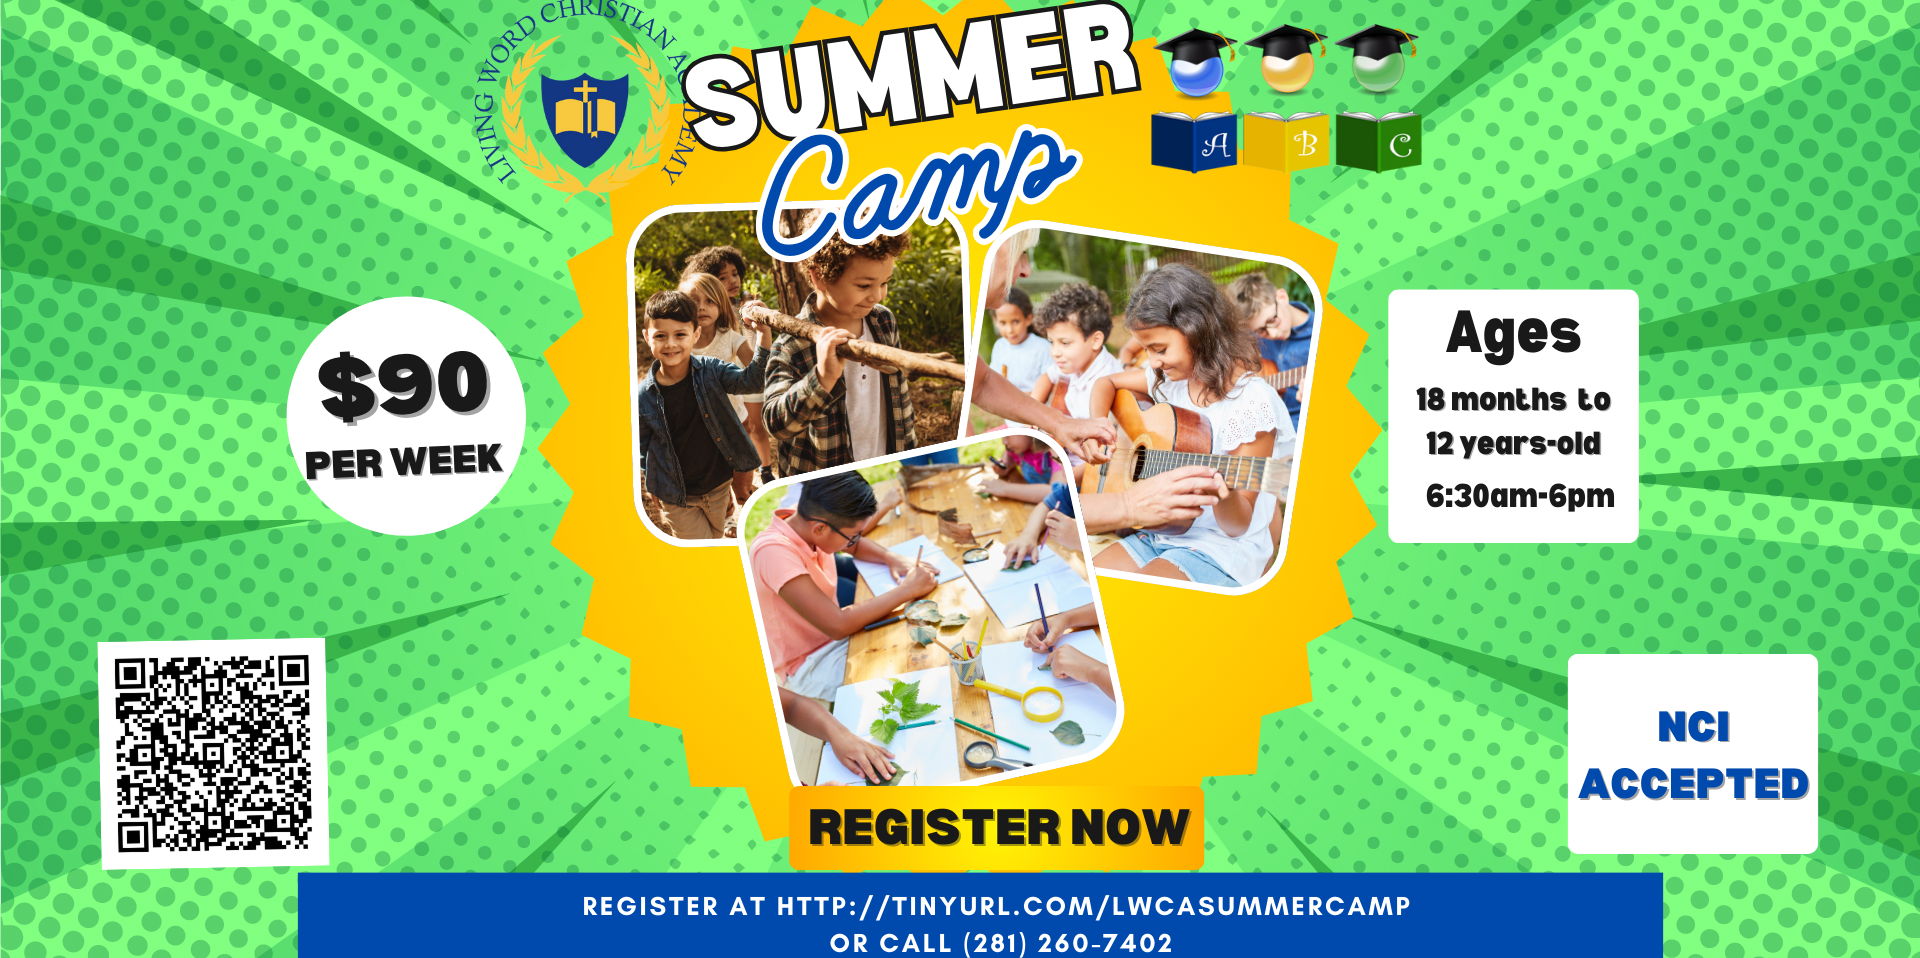 ABC/LWCA Summer Camp promotional image